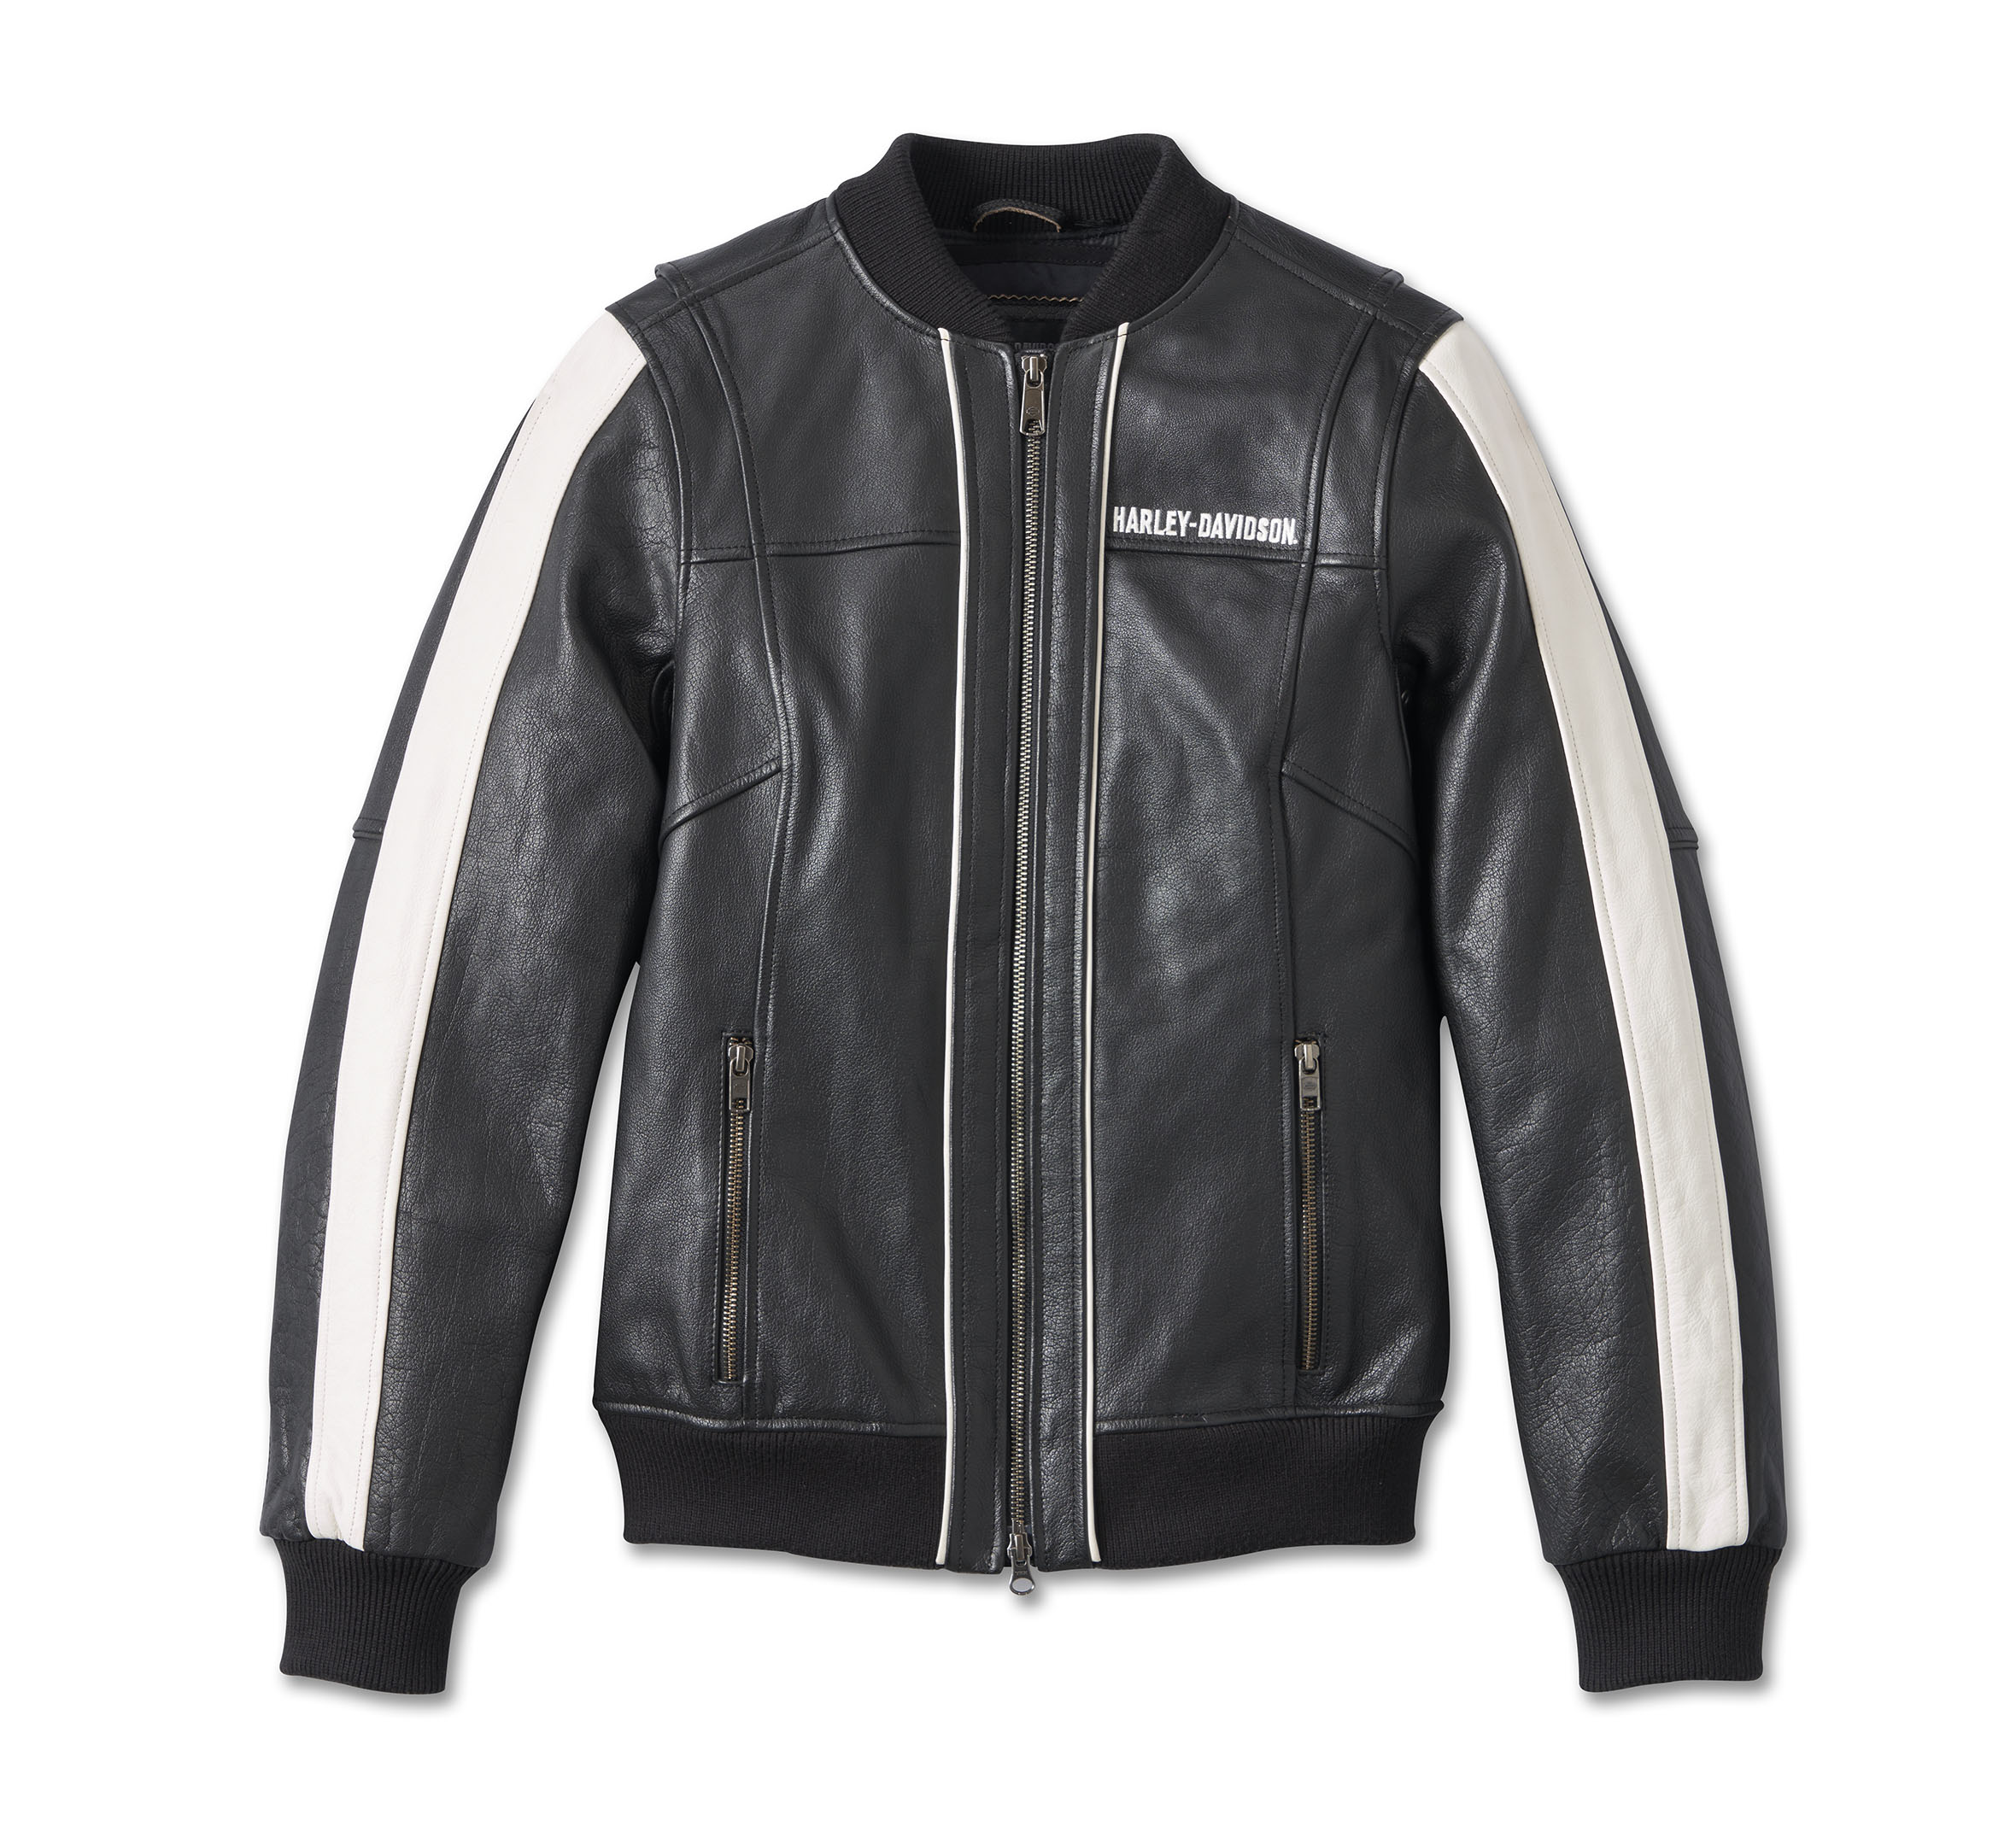 Open Road Motorcycle Jacket | lupon.gov.ph